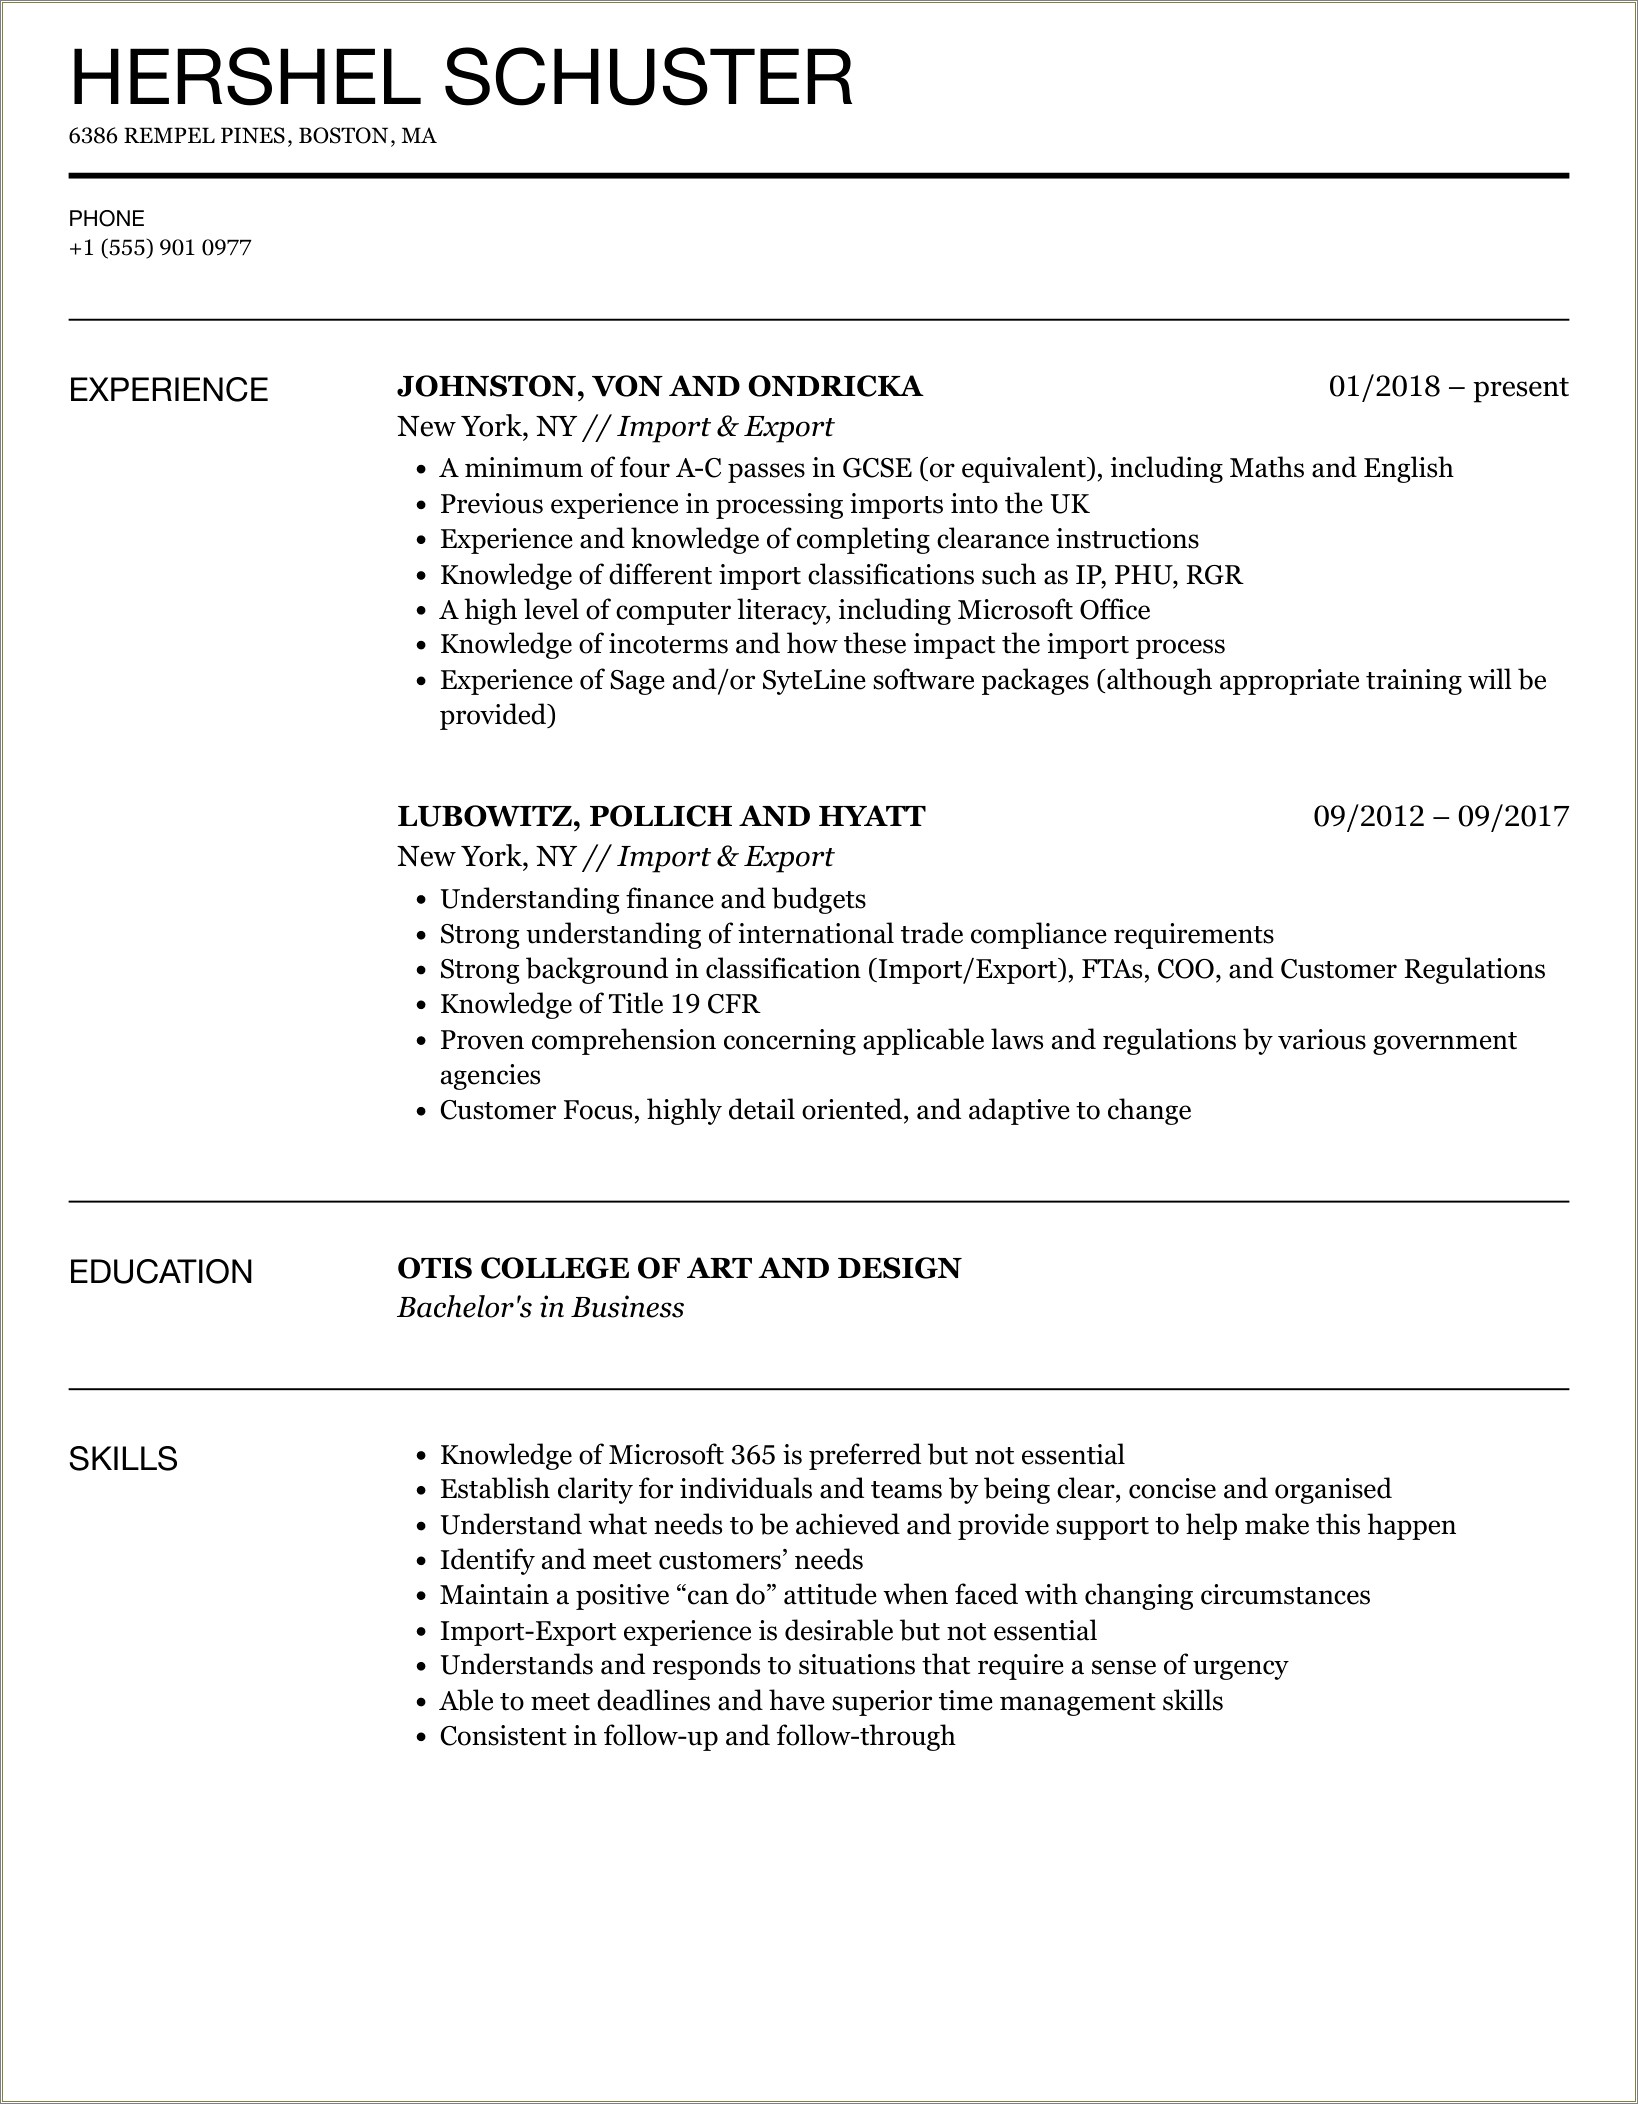 Best Resume Format To Save Room